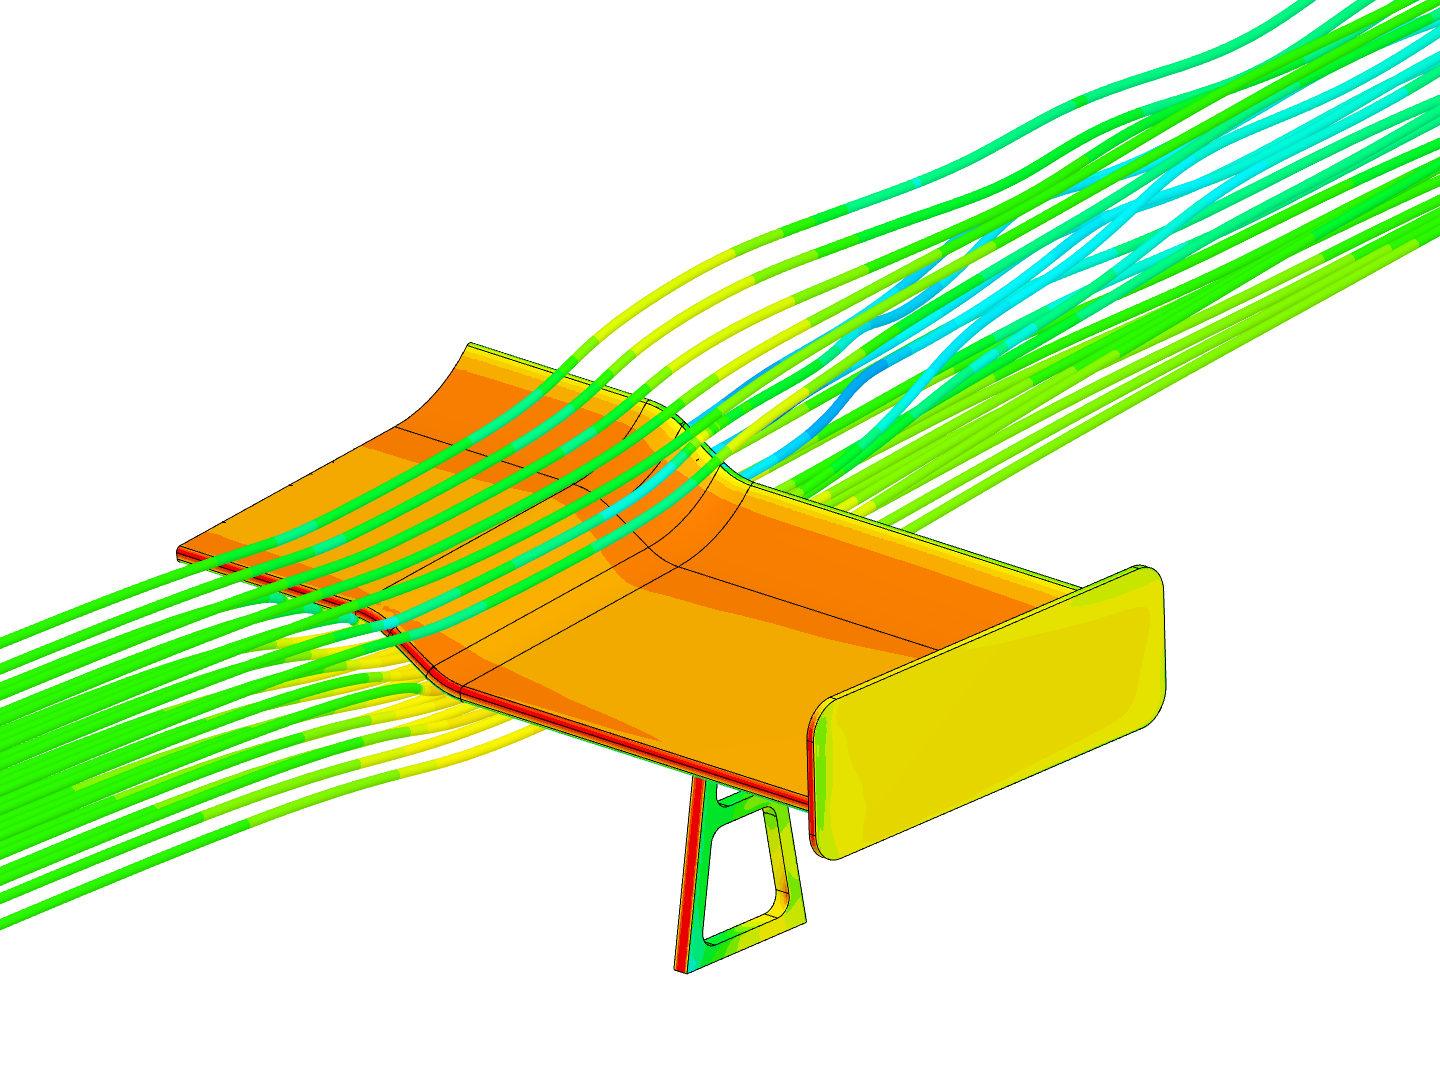 Coursera - Airflow around a GT car spoiler (try) image